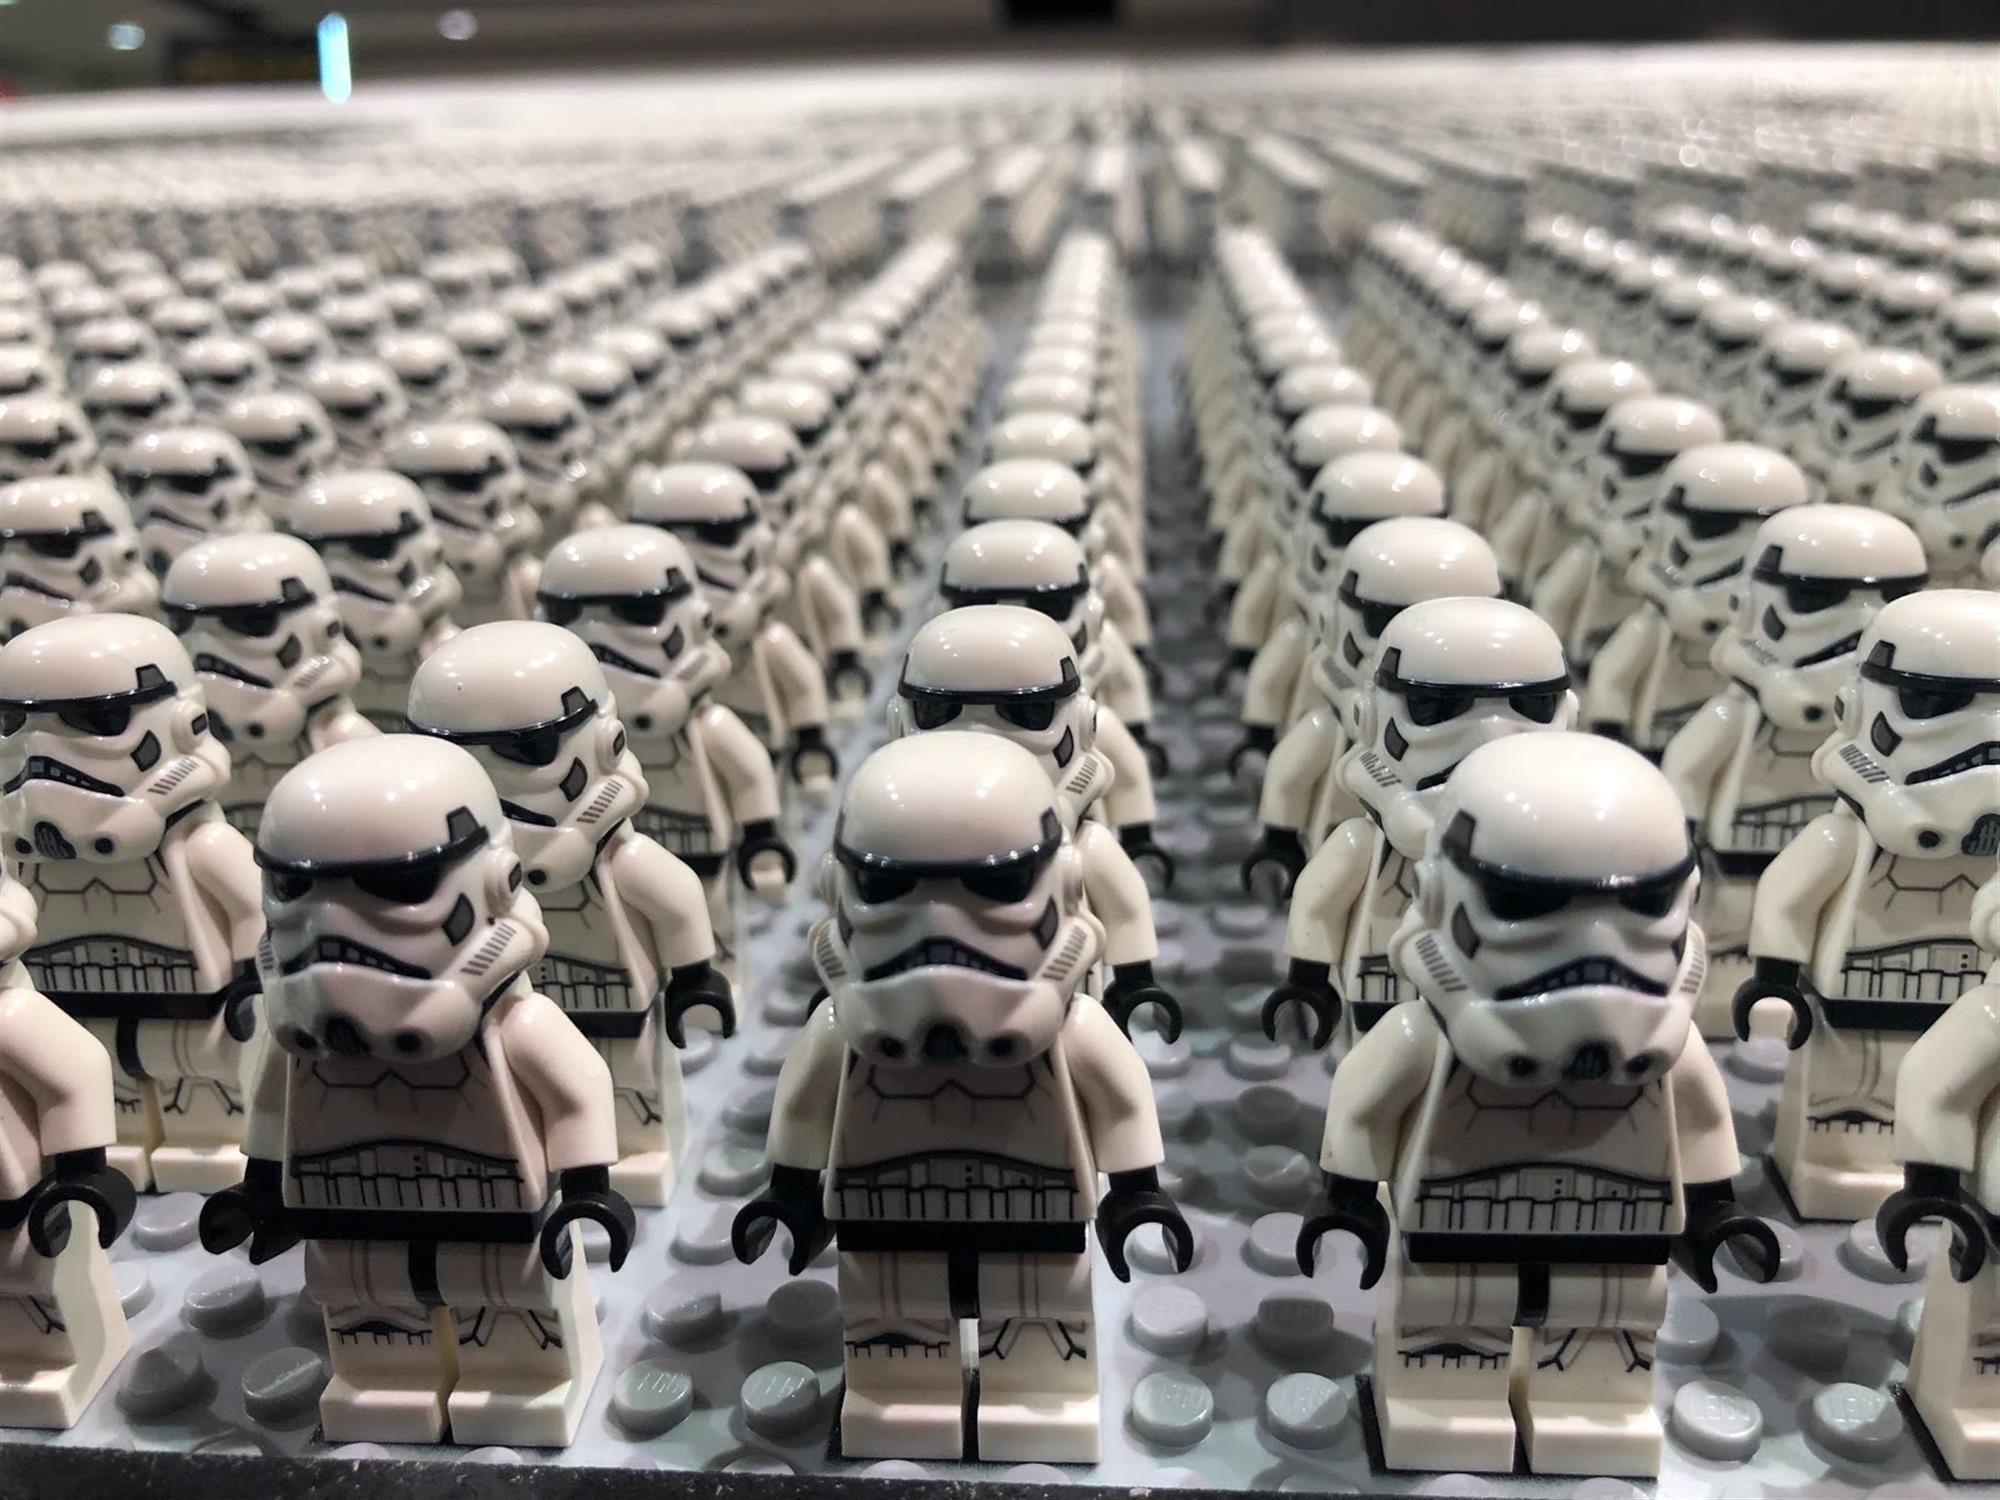 LEGO Sets World Record with Stormtrooper Army Build at Star Wars